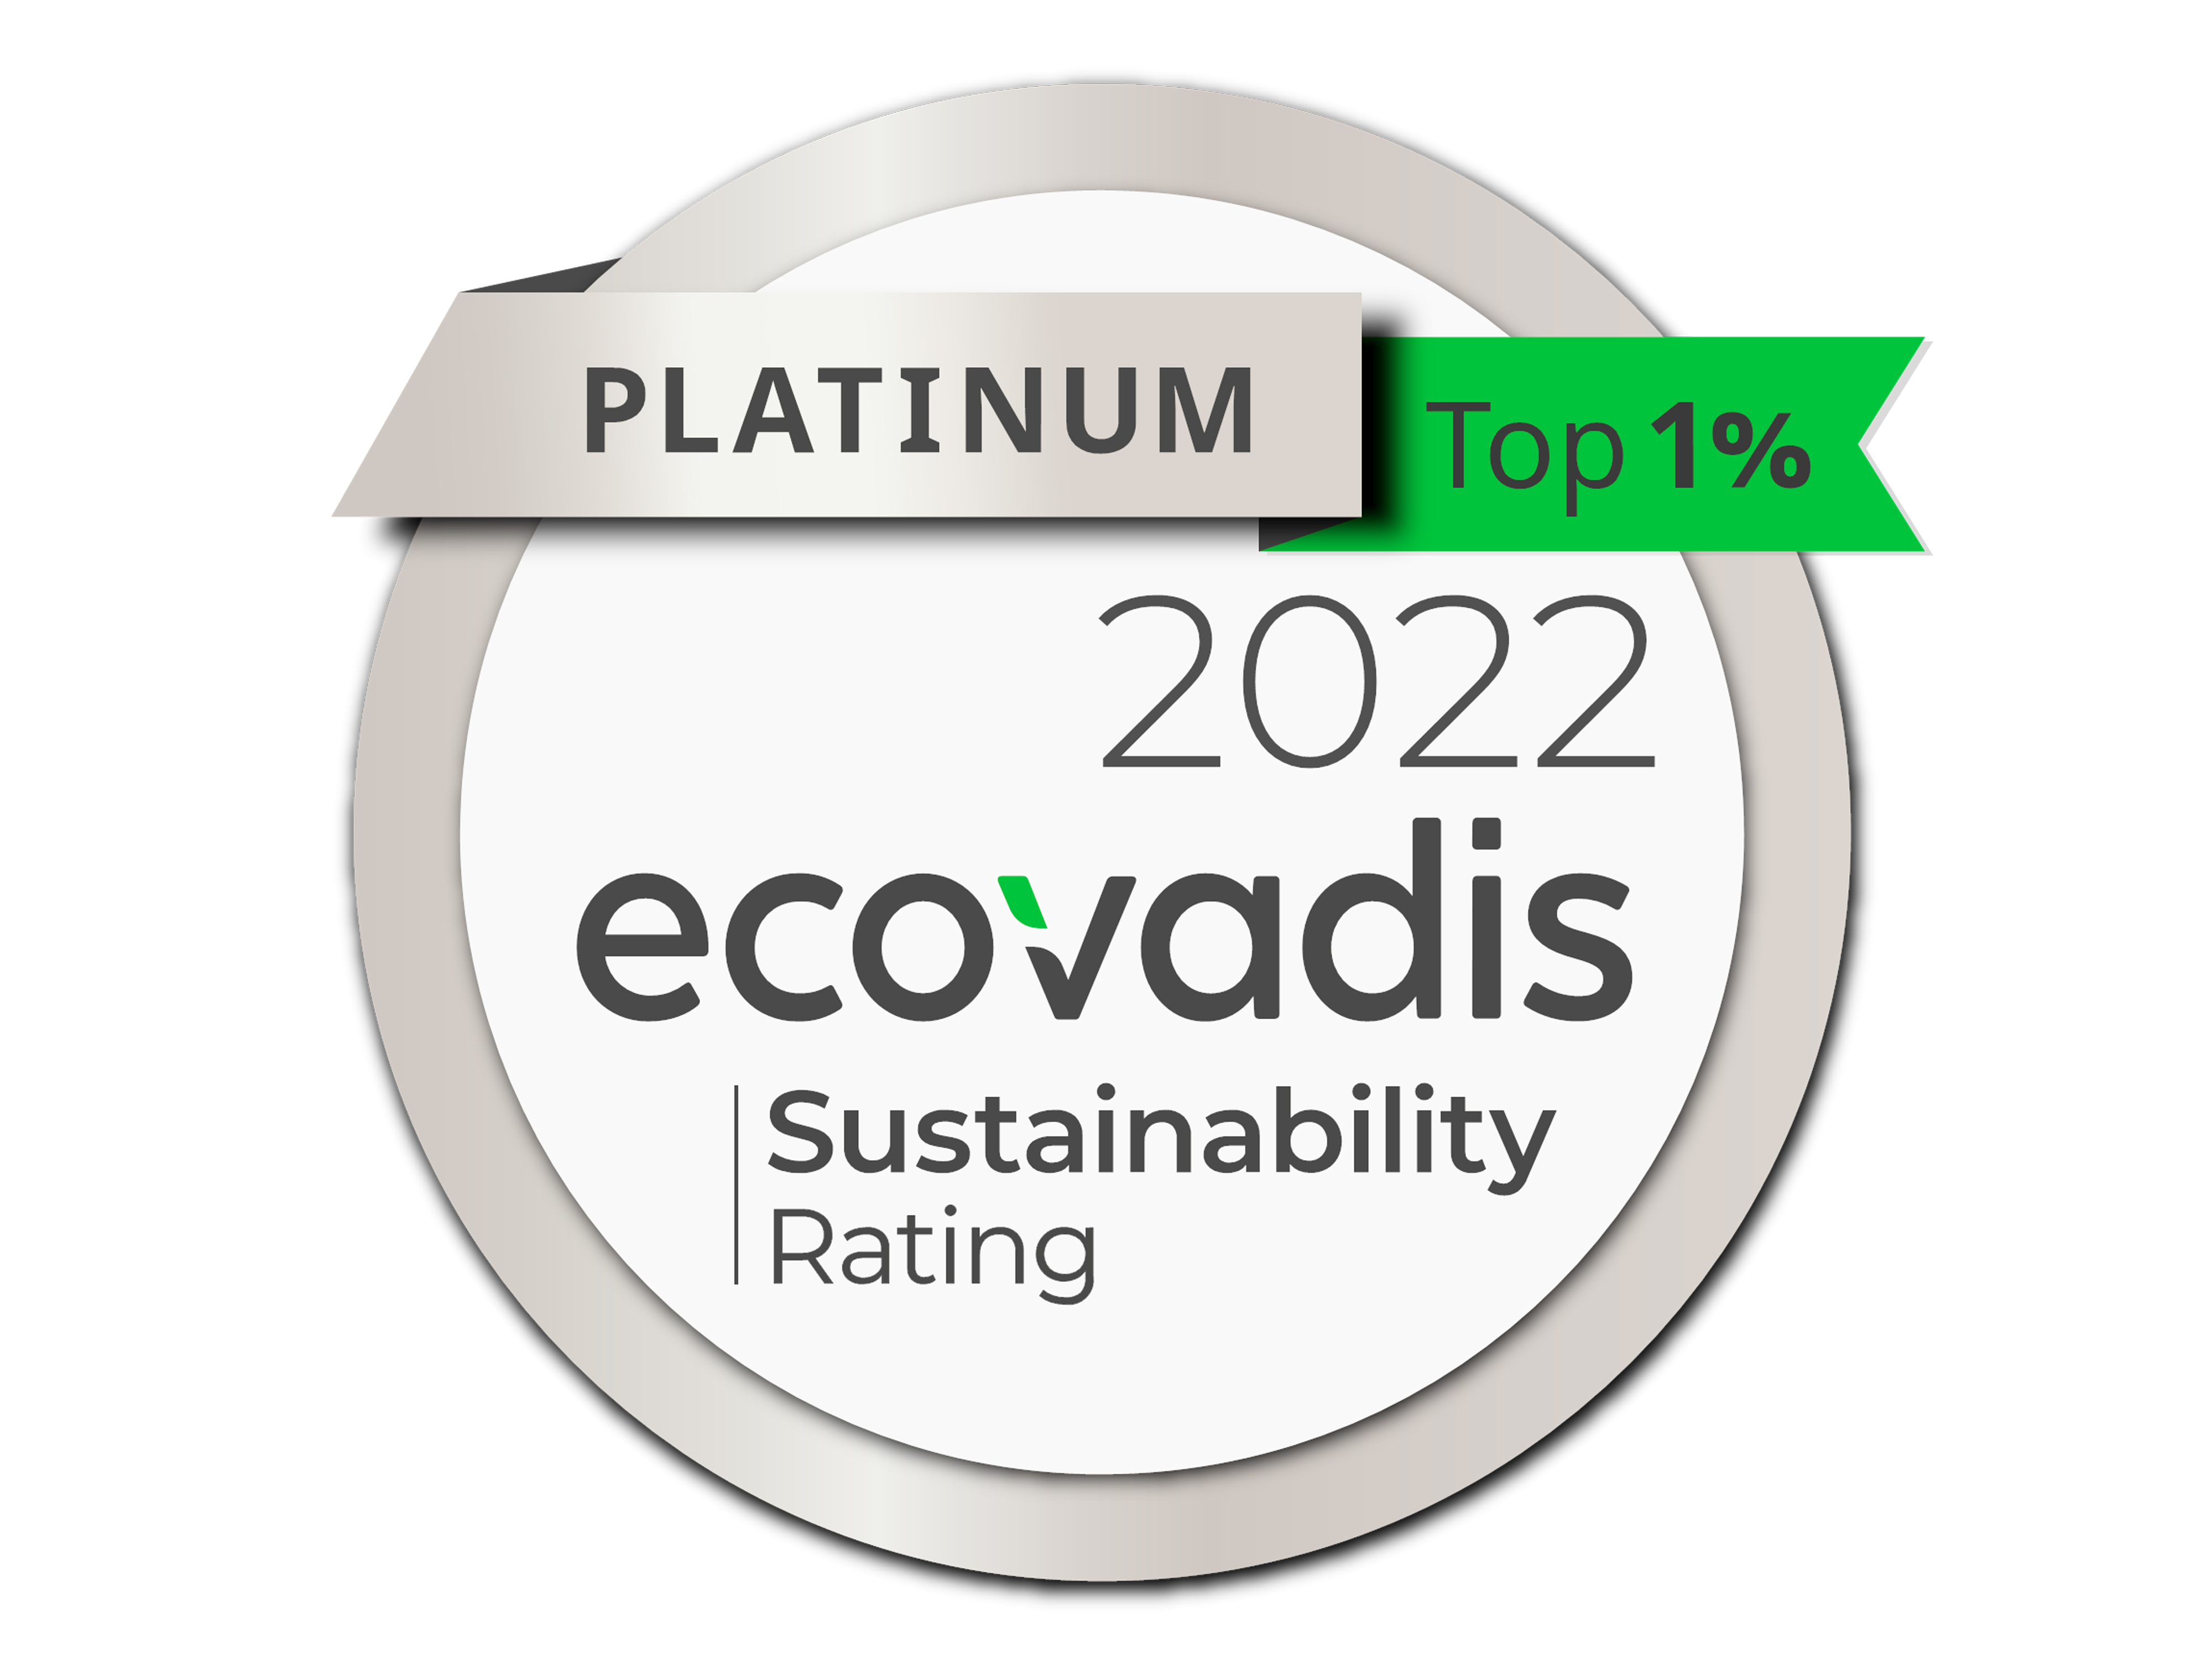 Diamond Packaging Awarded Platinum Rating in 2022 EcoVadis Sustainability Assessment.